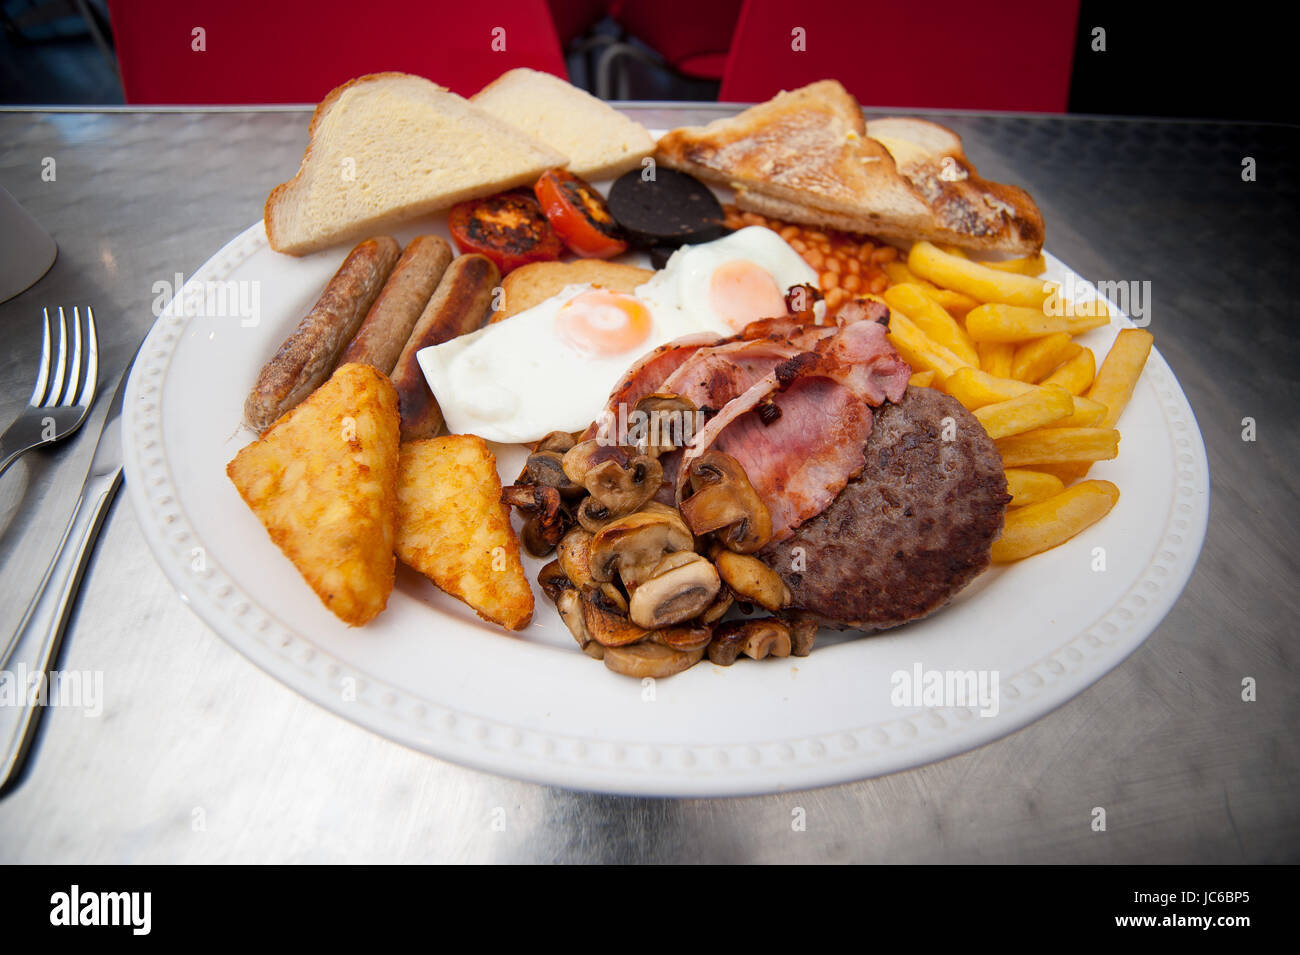 A giant breakfast. Consisting of 2 eggs, 3 bacon, 3 sausage, chips, hash browns, beans, tomatoes, mushrooms, burger, buttered slice, toast. Stock Photo